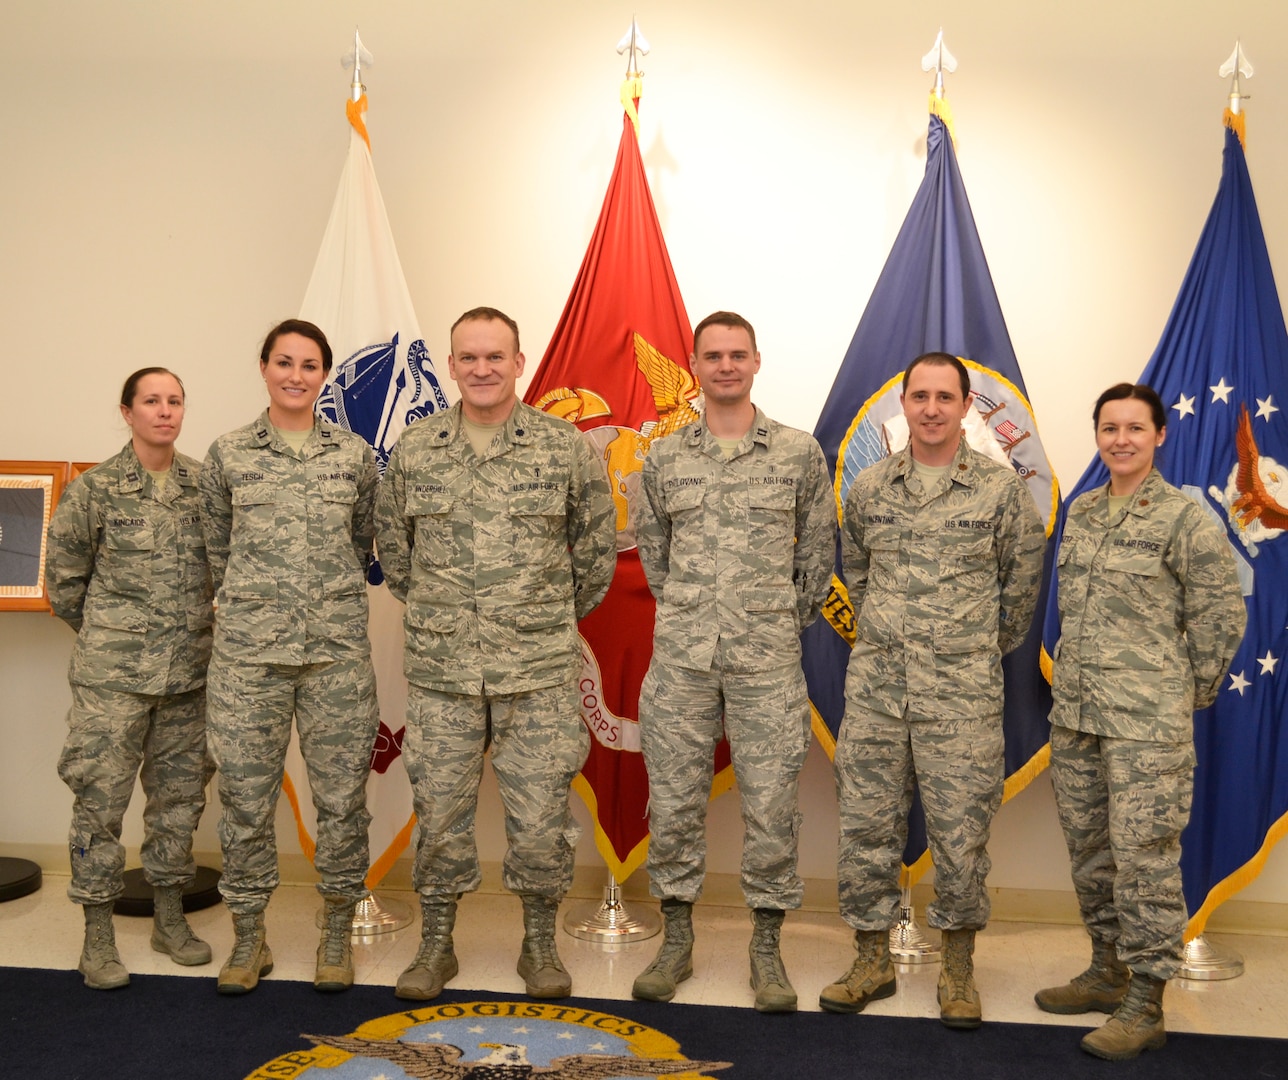 The Air Force Pharmacy Residency Program pharmacists pose with Lt. Col. Derek Underhill, left center, Customer Pharmacy Operations Center branch chief, for a group photo at DLA Troop Support, Feb. 7, 2018 in Philadelphia.